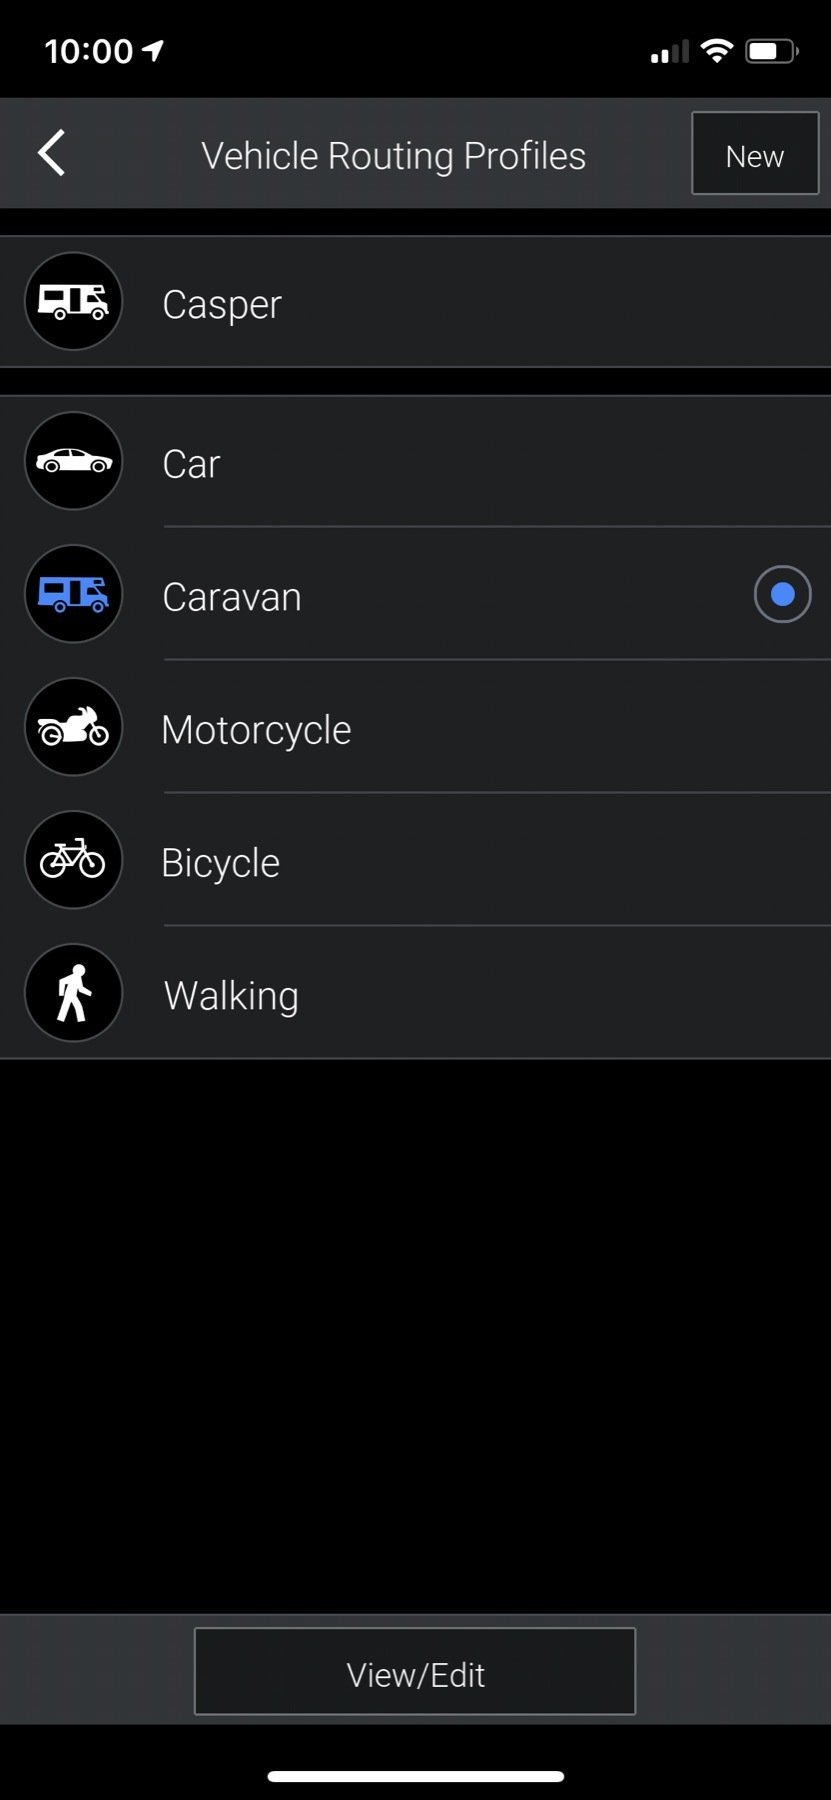 Different vehicle types supported in the app